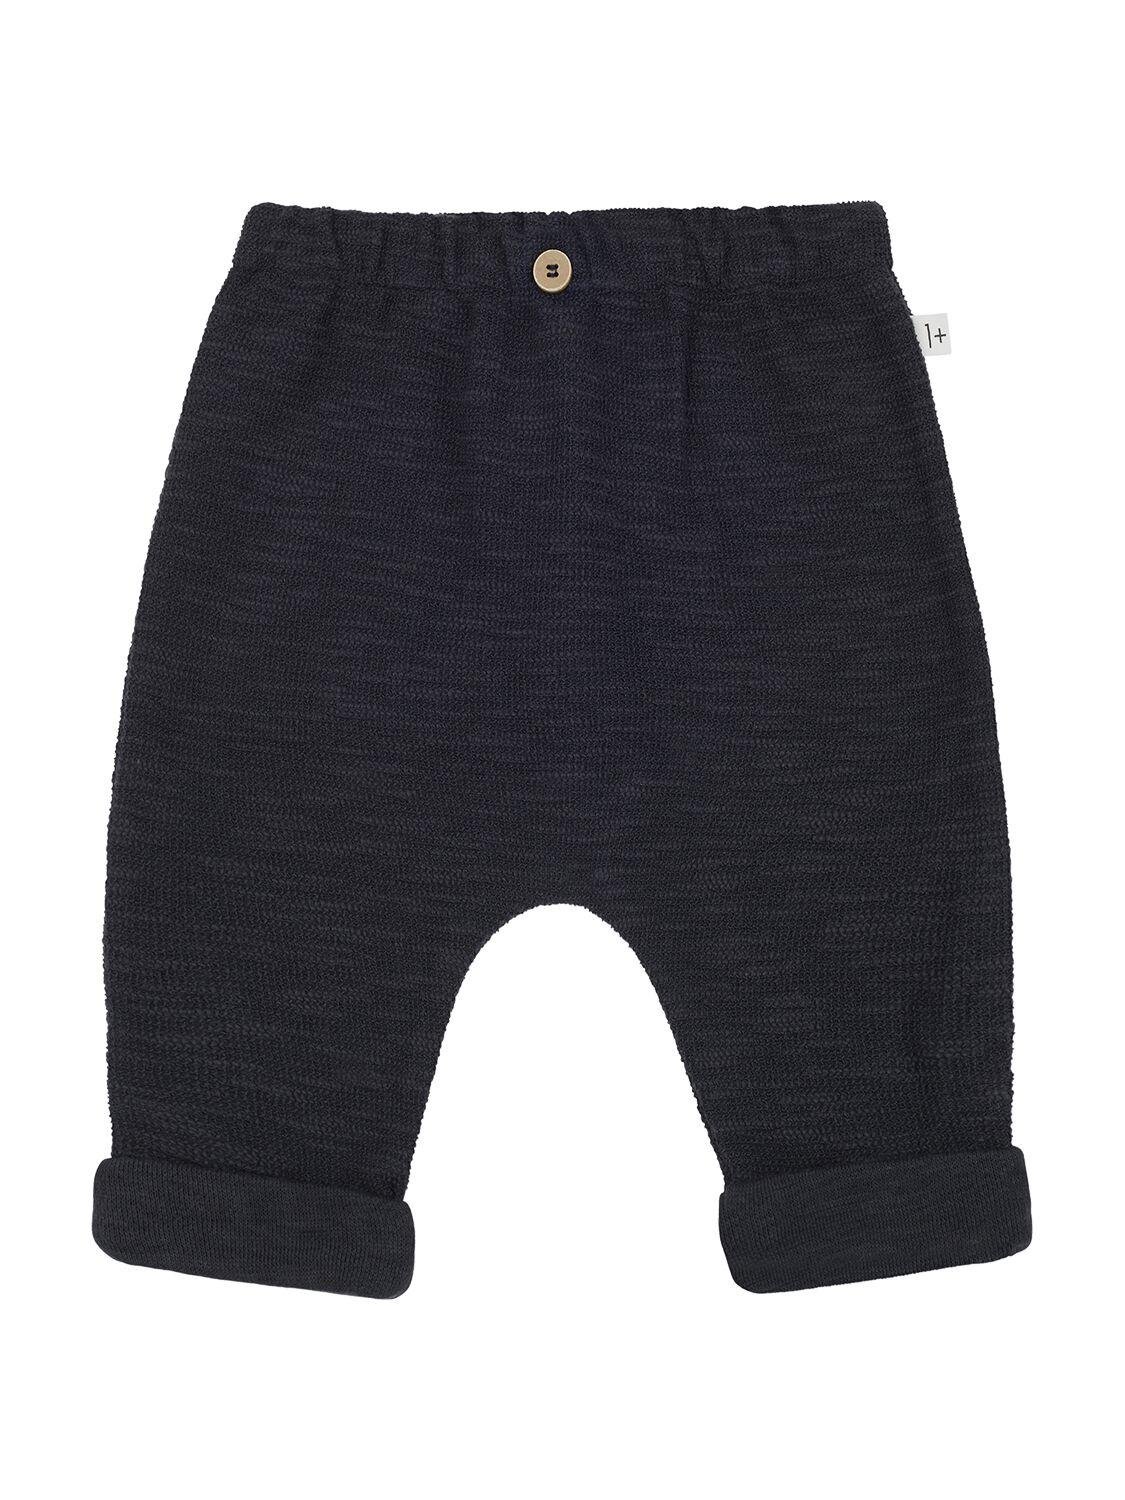 Cotton Blend Sweatpants by 1 + IN THE FAMILY